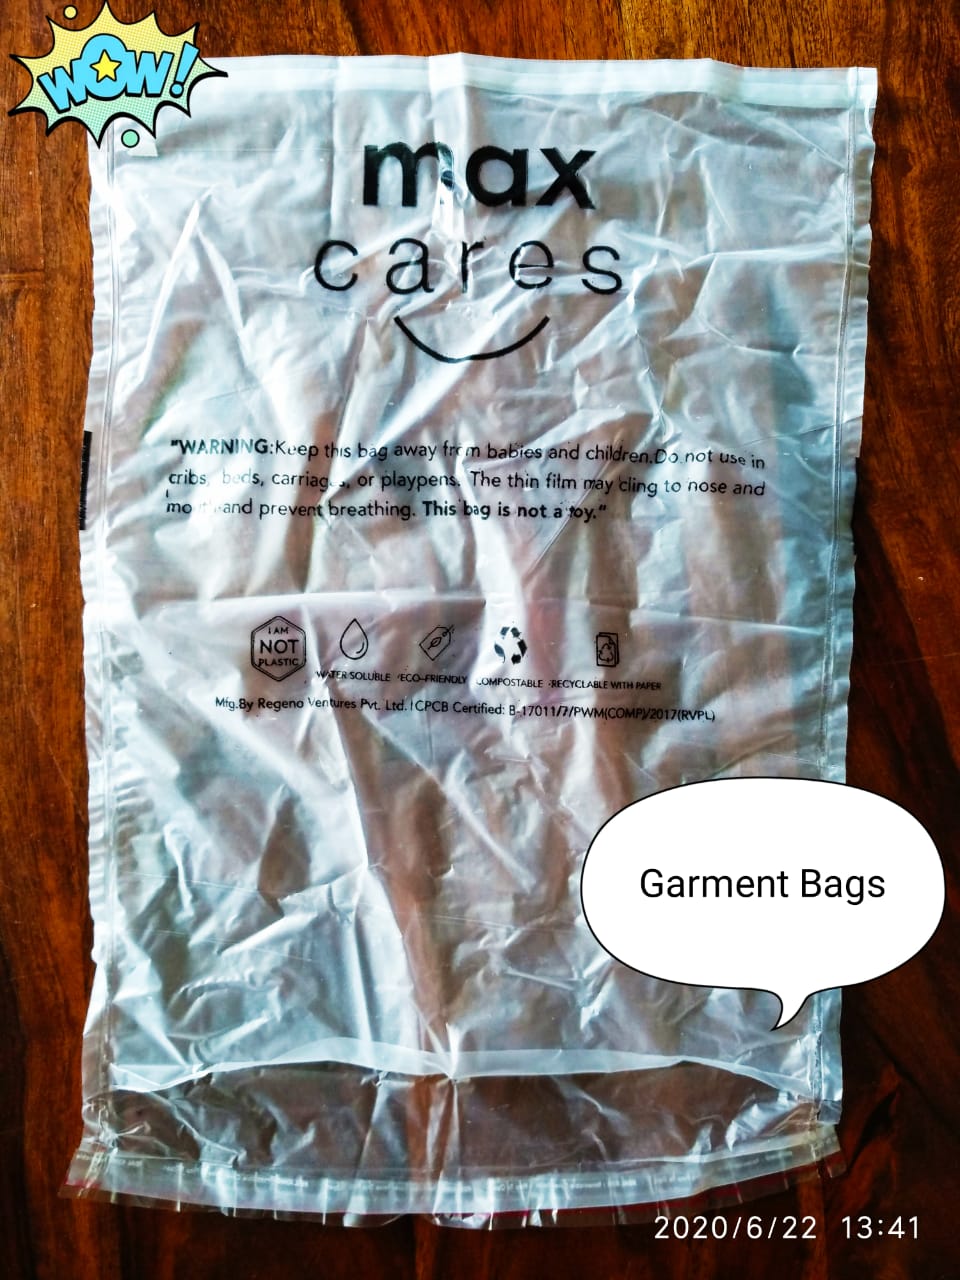 Dr. Bio Reusable, Recyclable, Compostable Carry Bags, Grocery Bags  (20x24)-5KG Grocery Bag Price in India - Buy Dr. Bio Reusable, Recyclable,  Compostable Carry Bags, Grocery Bags (20x24)-5KG Grocery Bag online at  Flipkart.com